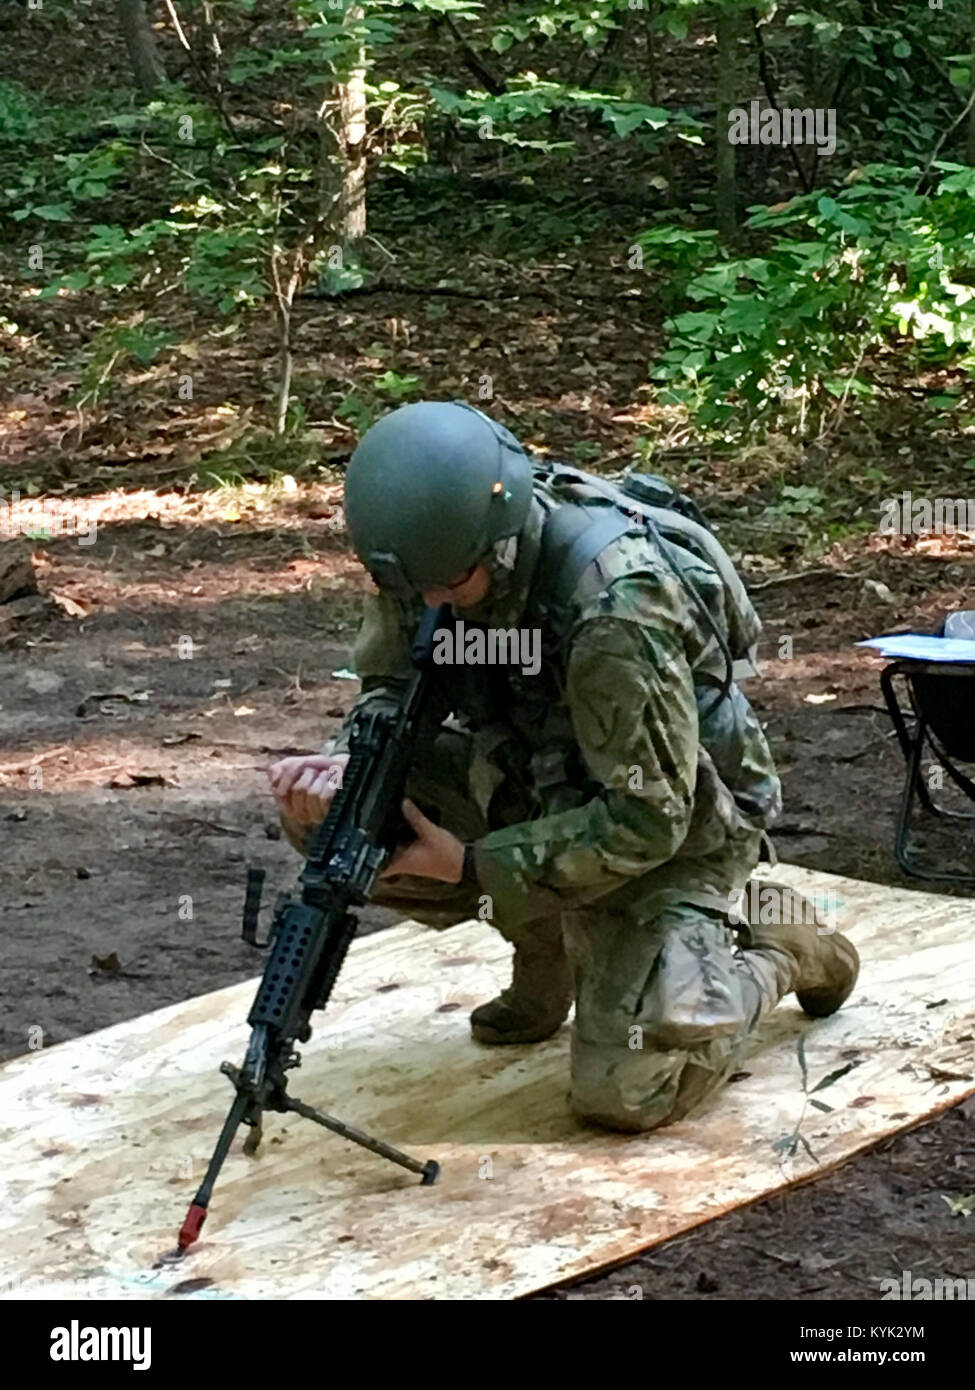 1st. Lt. Josh Birchfield assigned to HHC, 1st Battalion, 149th Infantry Regiment correctly assembles and performs a function test on a M249 squad automatic weapon system during the Expert Infantry Badge qualification test at Fort Pickett Va., Aug. 9, 2017. (U.S National Guard photo by 1st. Lt. Michael Reinersman) Stock Photo